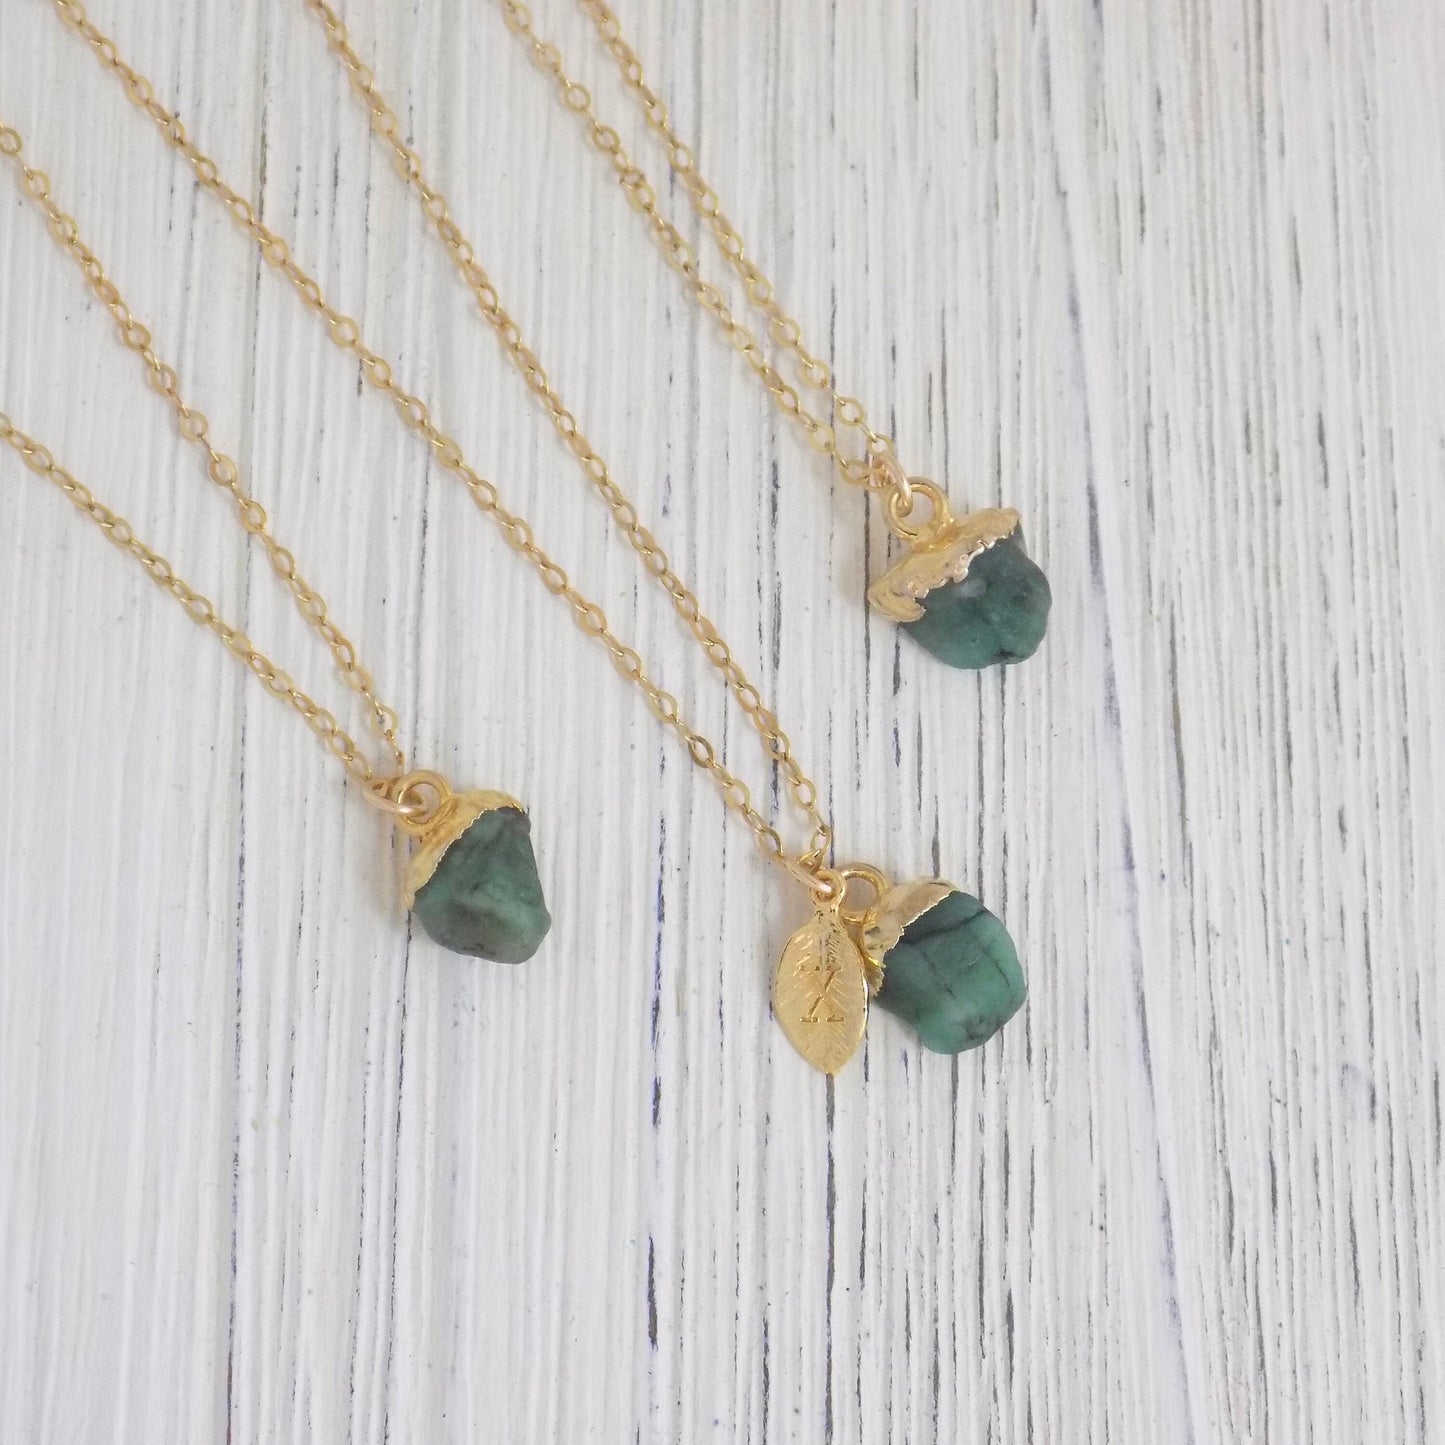 Tiny Raw Emerald Necklace - Personalized Emerald Necklace Gold